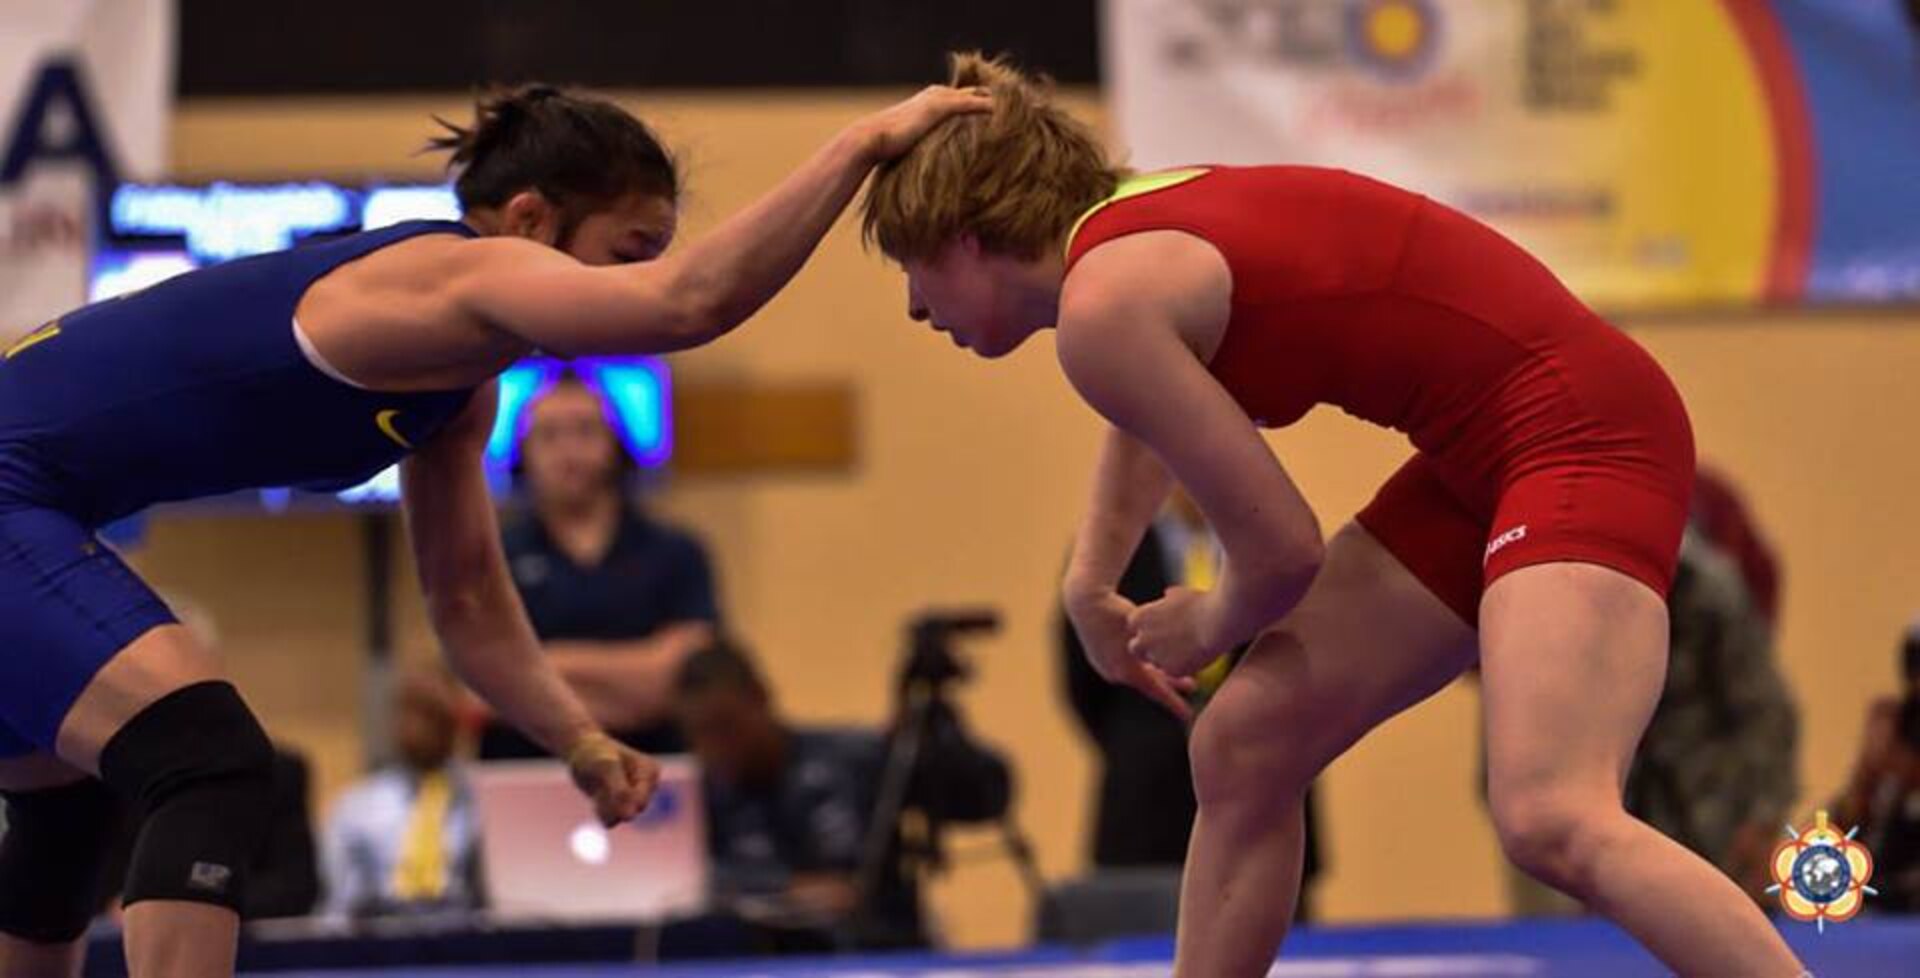 Army Sgt. Whitney Condor (red) against Hui Li of China during the 2014 CISM World Military Wrestling Championship at Joint Base McGuire-Dix-Lakehurst, New Jersey on 3 October 2014.